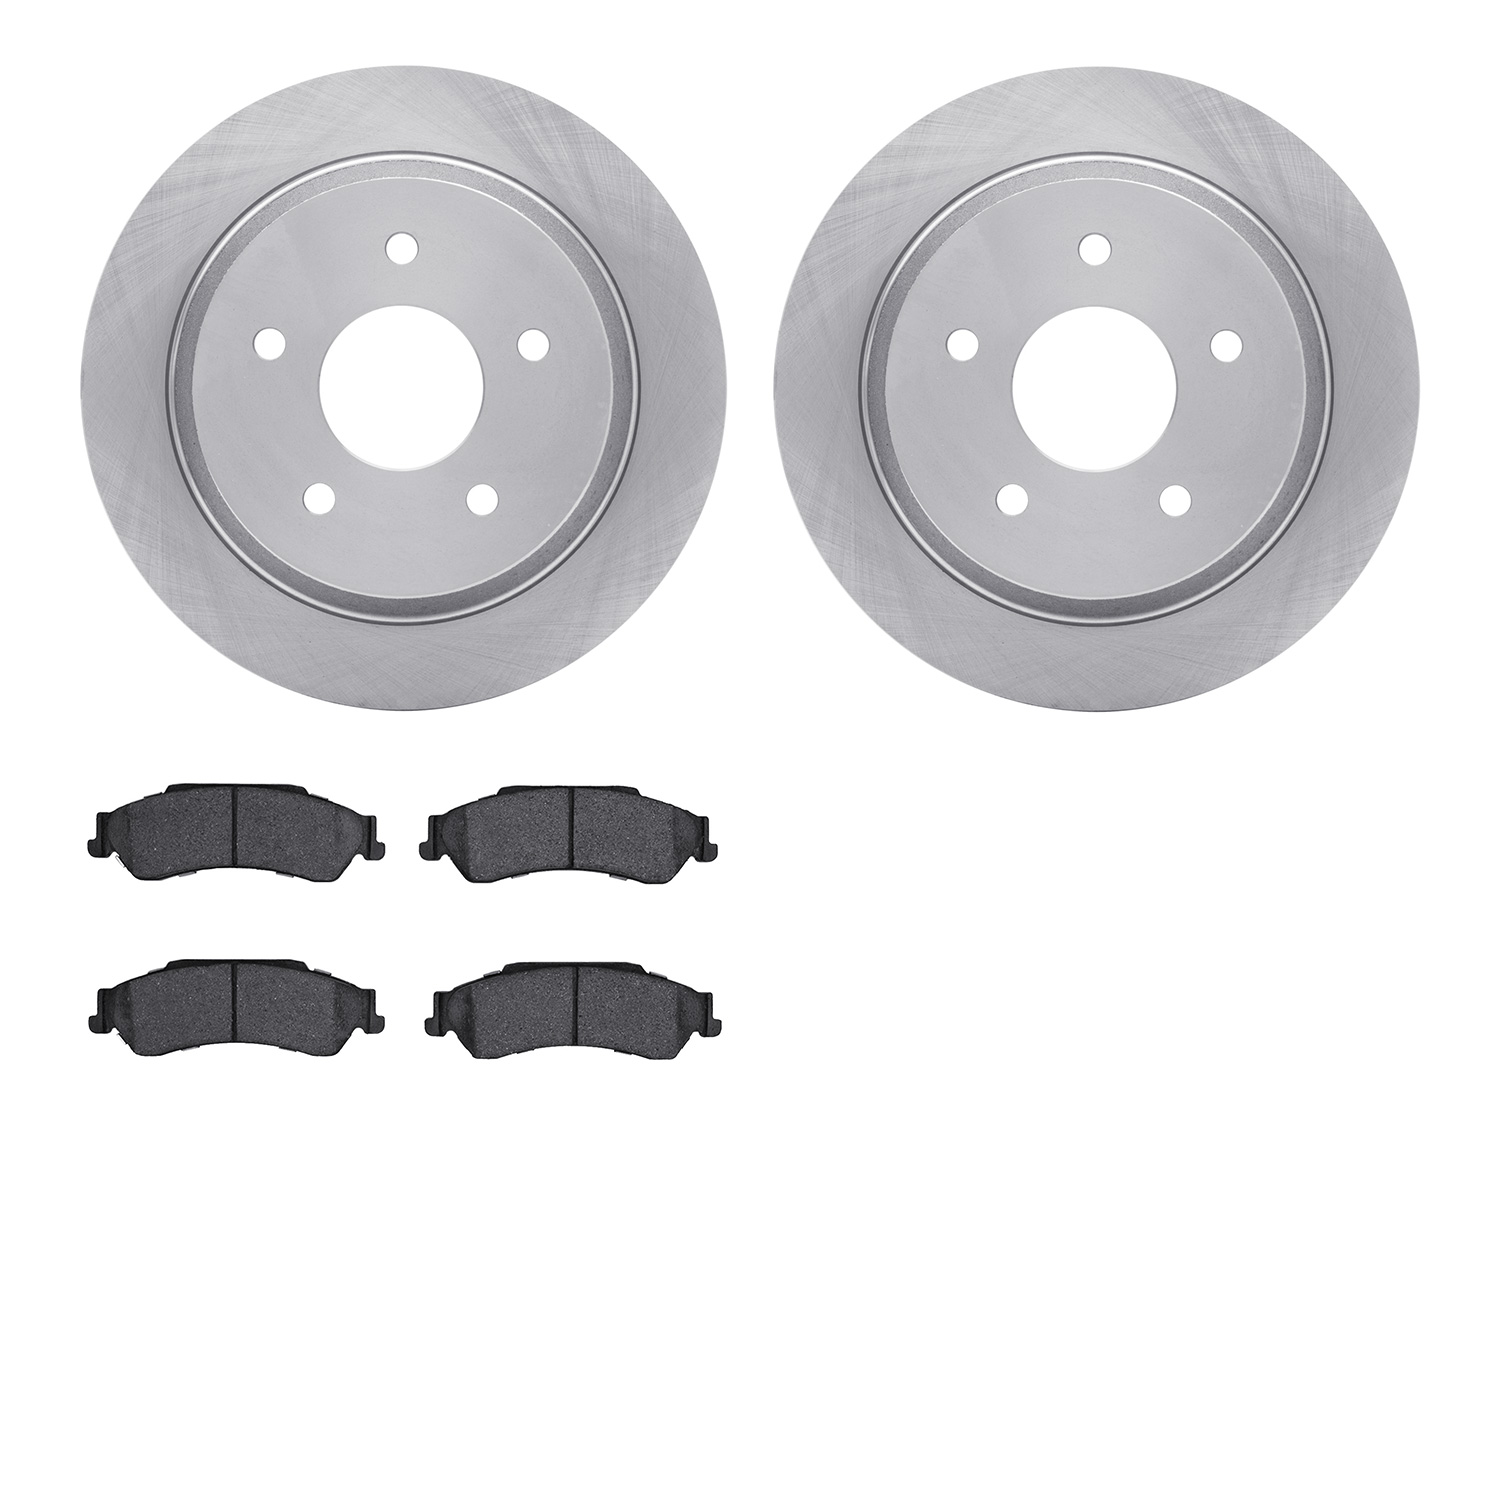 6402-48061 Brake Rotors with Ultimate-Duty Brake Pads, 1998-2005 GM, Position: Rear